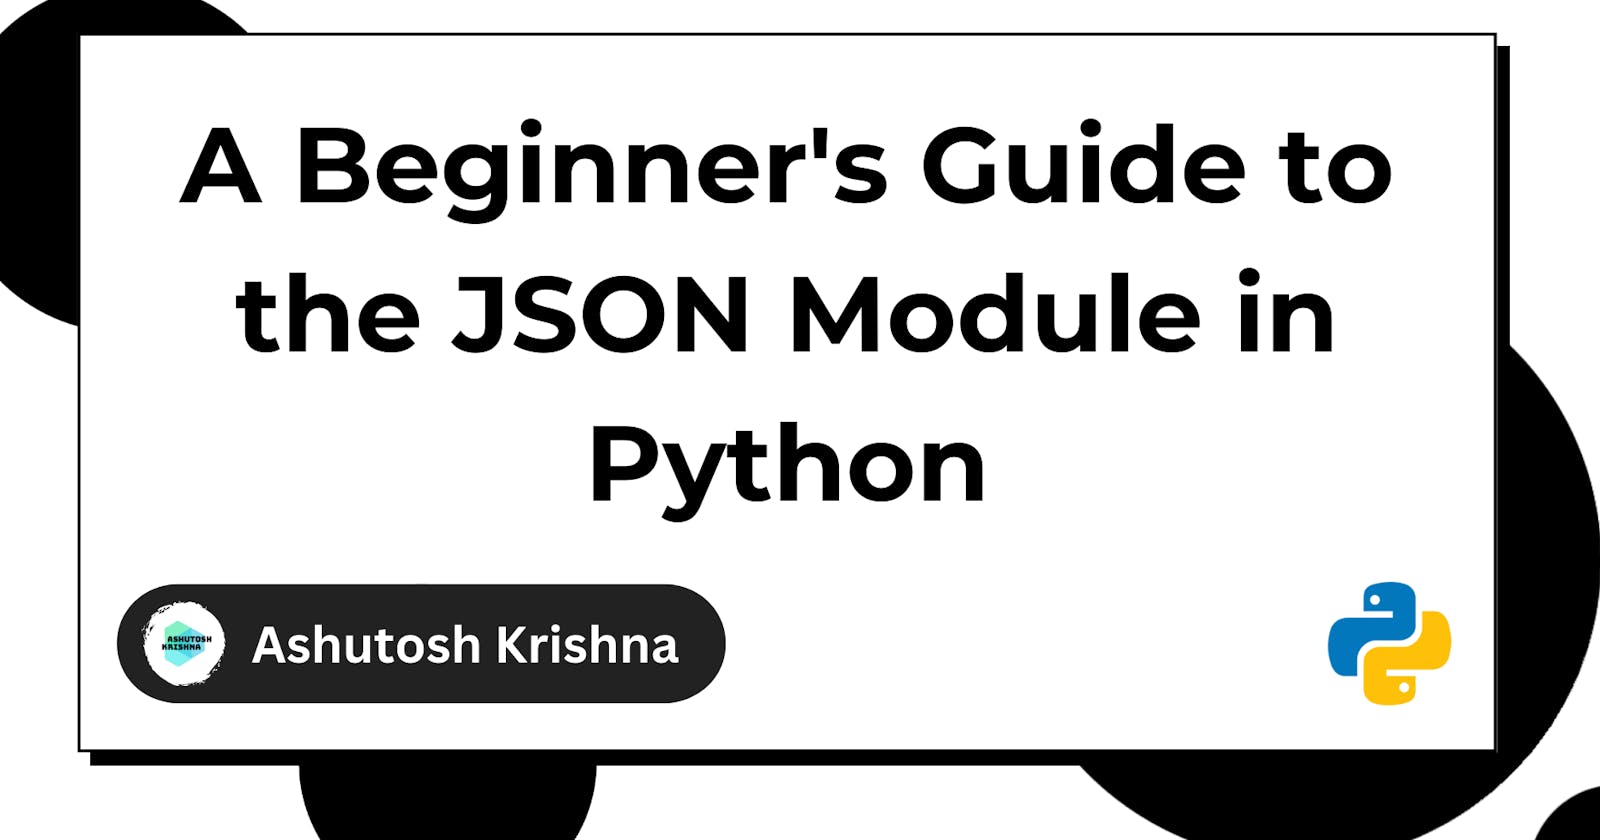 A Beginner's Guide to the JSON Module in Python